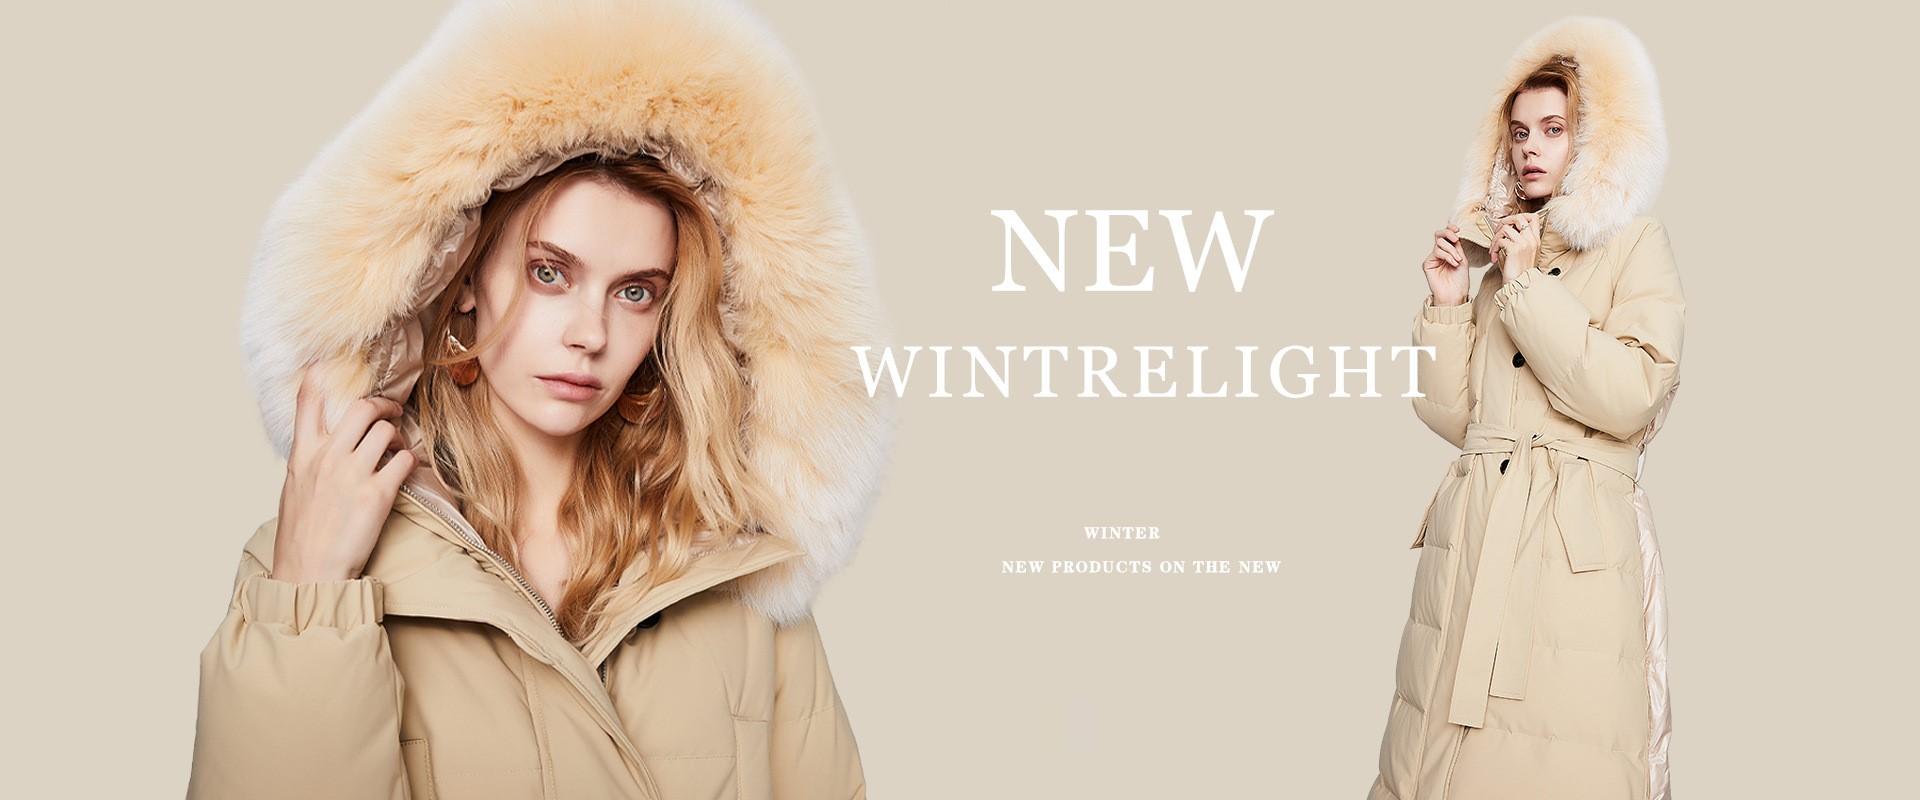 New Winter Collection - WINTRELIGHT. Discover the Latest Down Jackets for Winter from Nanjing Six Fu